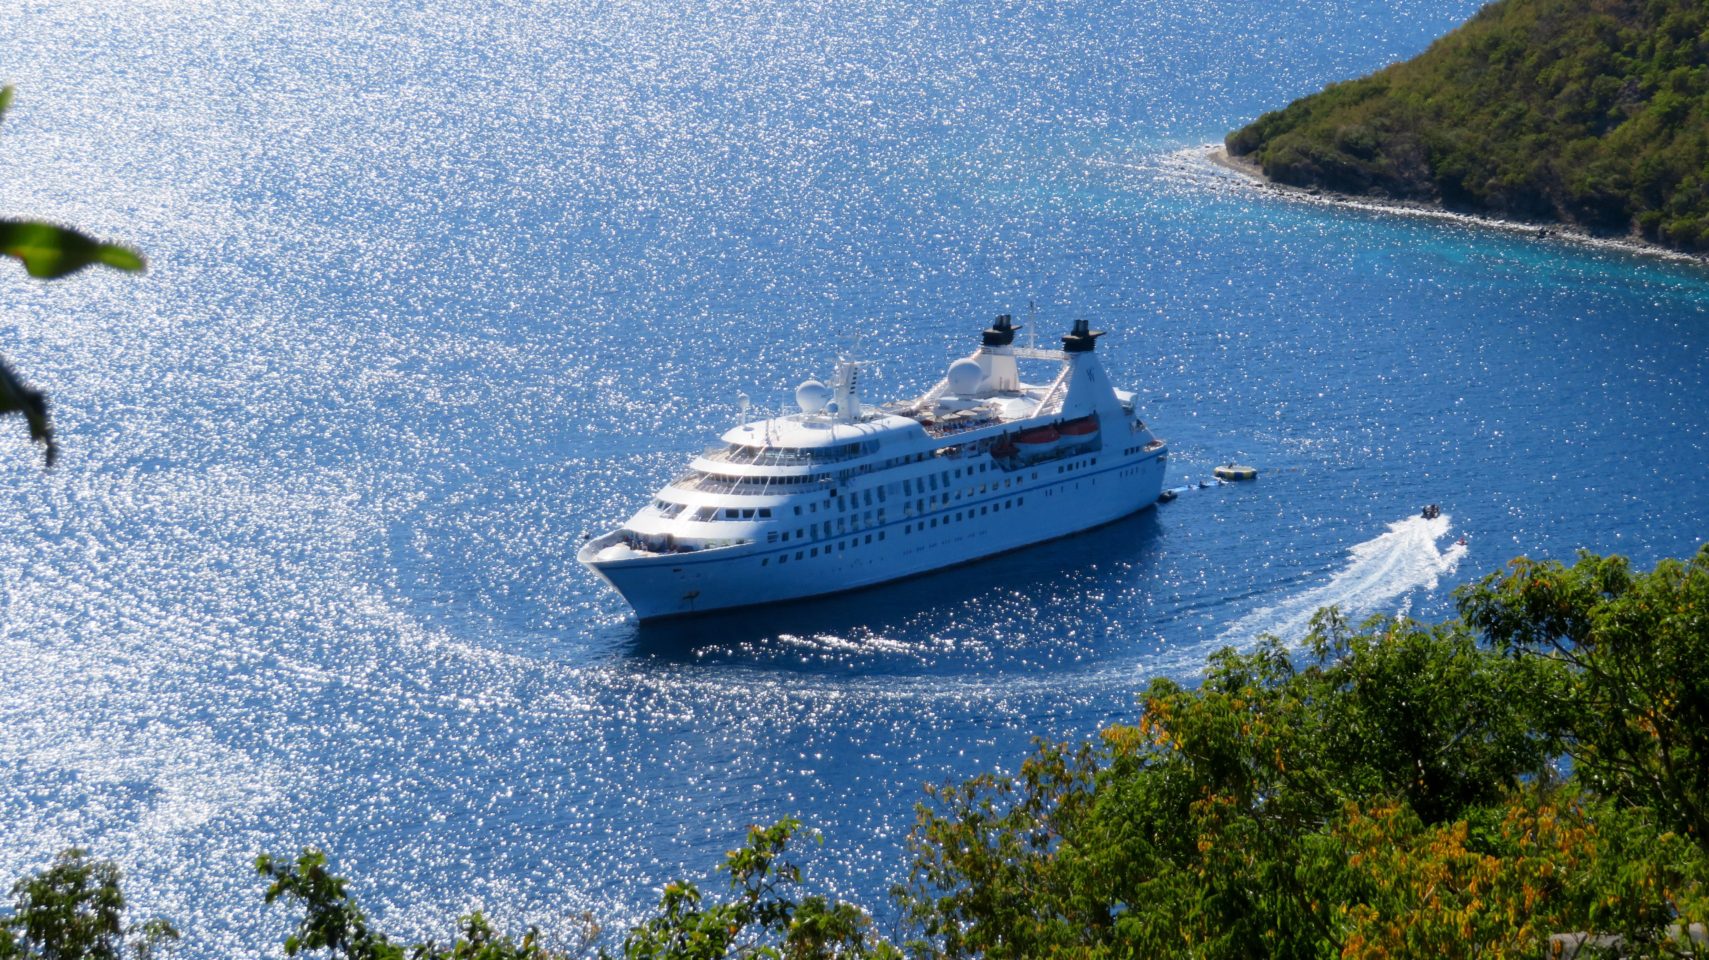 Windstar Cruises Star Legend in Baie des Saintes, Guadeloupe